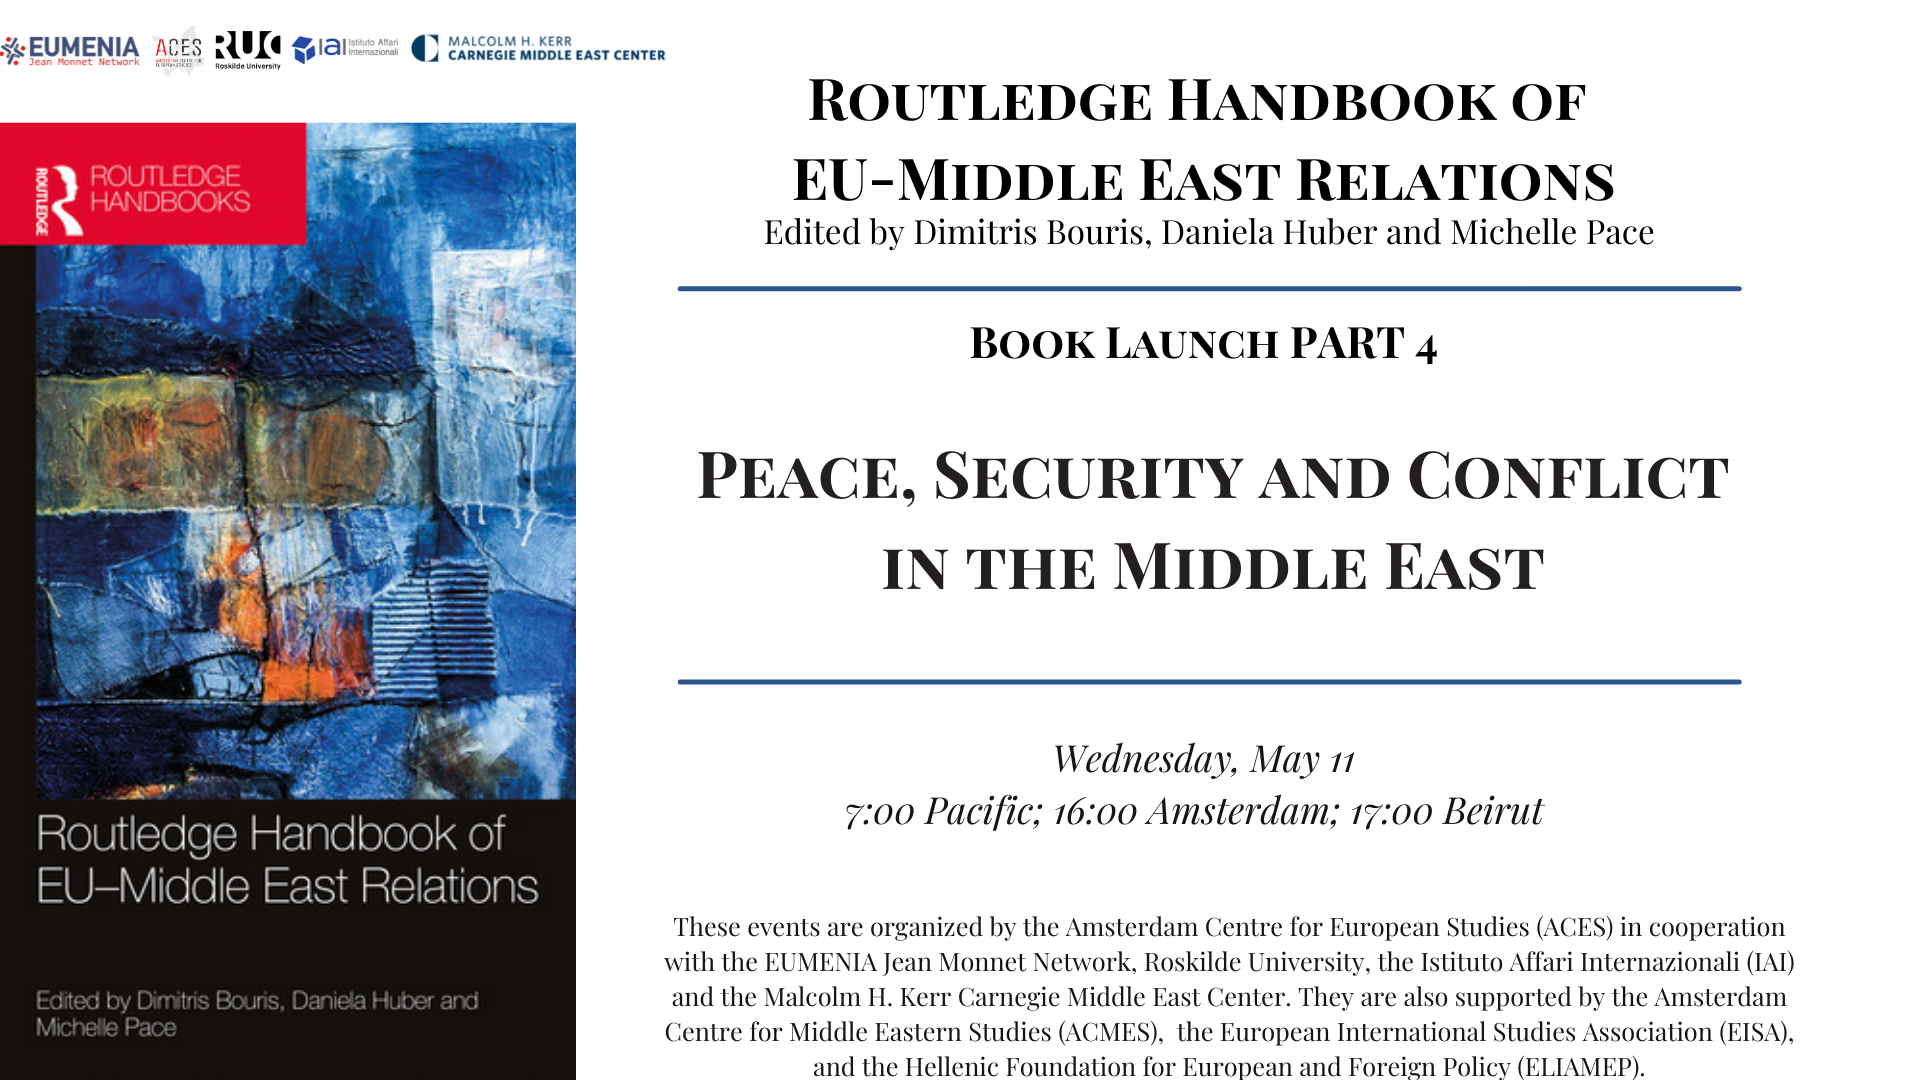 JOIN US FOR THE FOURTH EVENT OF THE LAUNCH SERIES OF THE ROUTLEDGE HANDBOOK OF EU-MIDDLE EAST RELATIONS ON WEDNESDAY, MAY 11